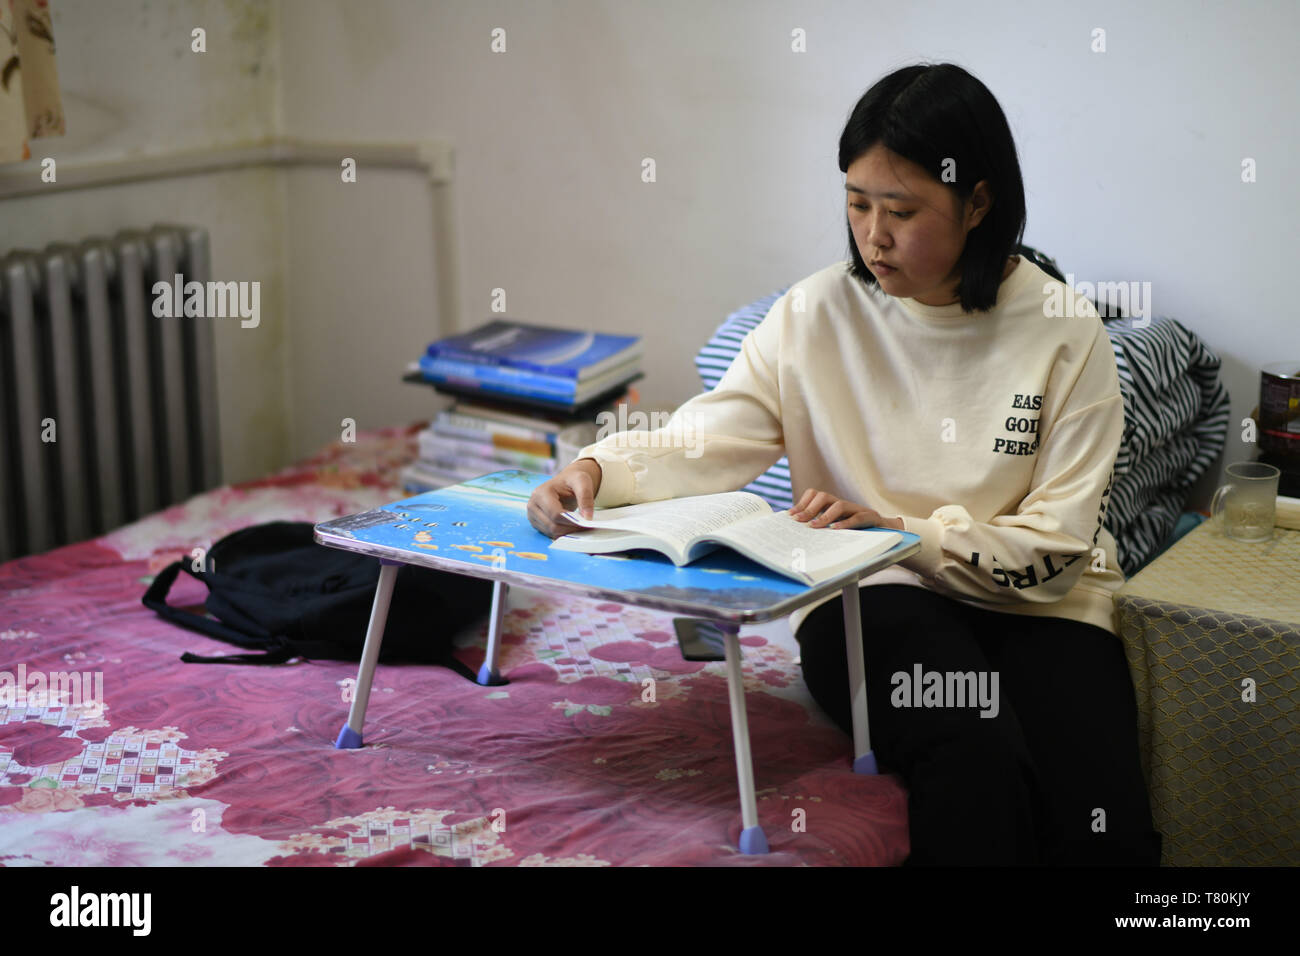 (190510) -- HARBIN, May 10, 2019 (Xinhua) -- Qin Tingting studies at her residence in Harbin, northeast China's Heilongjiang Province, on May 9, 2019. Qin Tingting, originally from north China's Inner Mongolia Autonomous Region, is a freshman of Harbin Engineering University. Suffering from Congenital Myasthenic Syndrome (CMS, also known as muscle weakness), she has to sit on a wheelchair and make much more effort than average people. After being diagnosed with CMS, Qin never gave up her dream that she wanted to get into university. She was admitted to the College of Materials Science and Chem Stock Photo